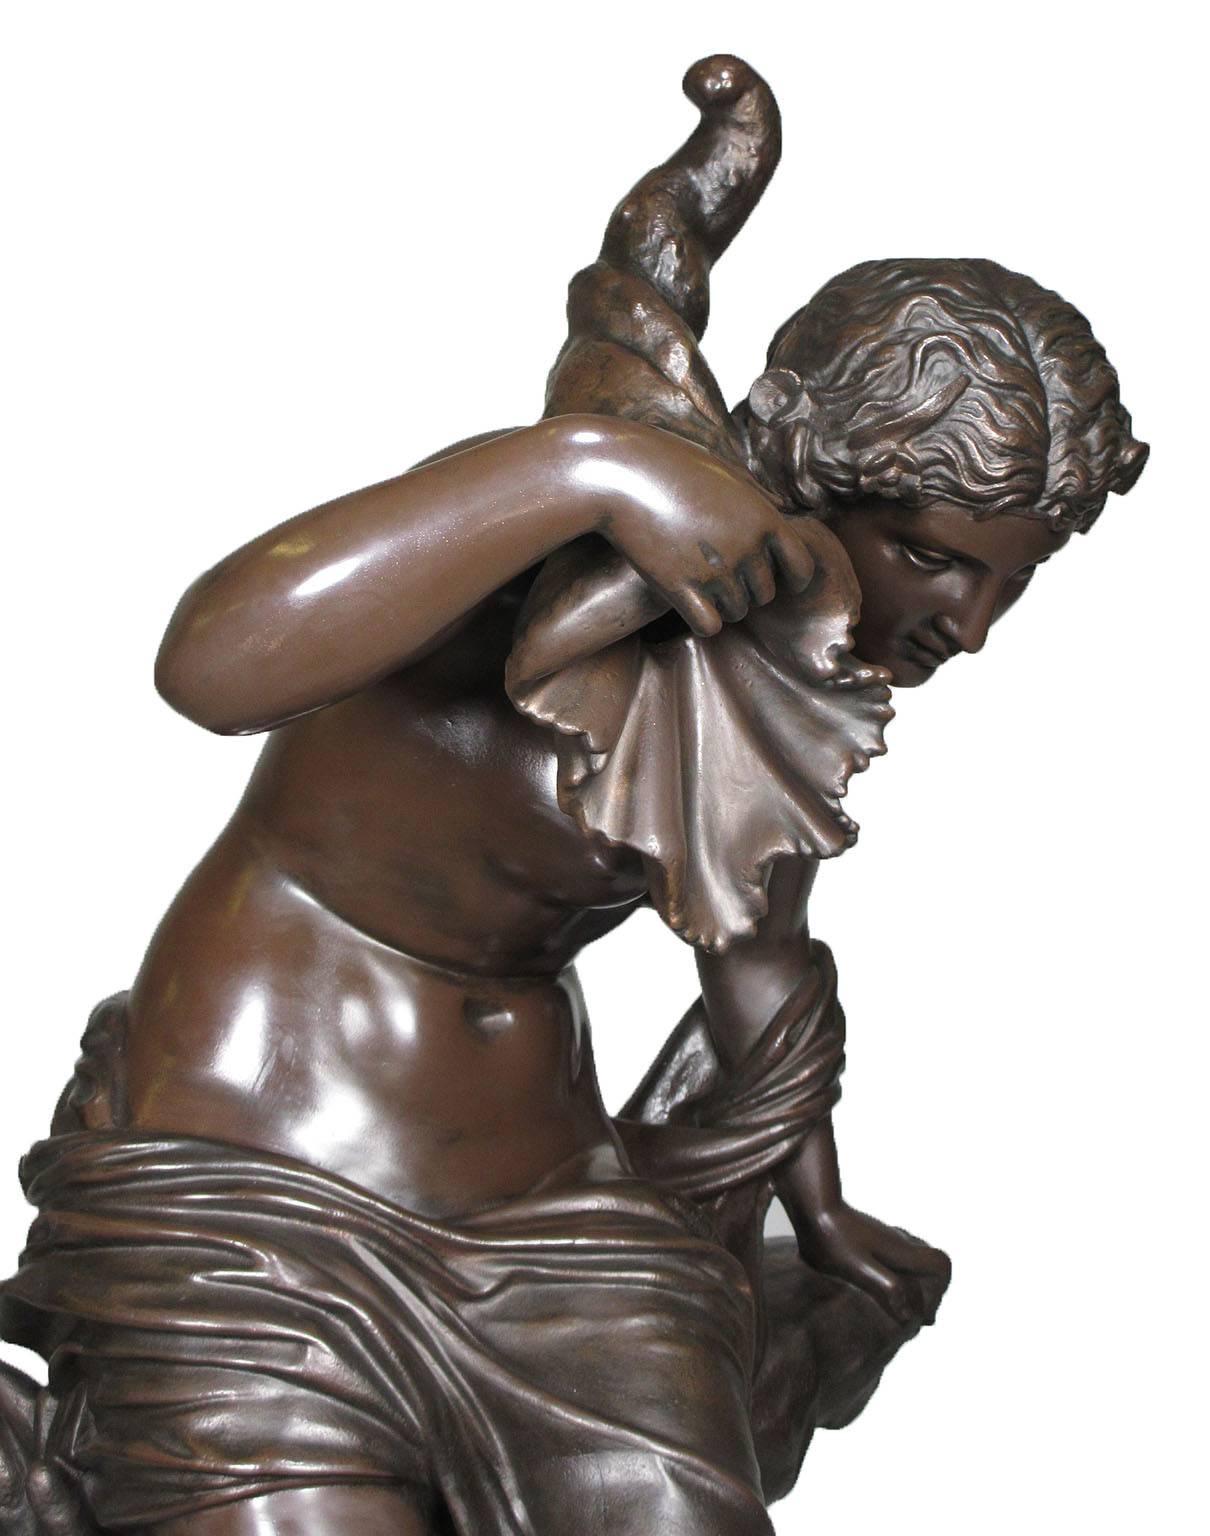 Large French 19th Century Cast-Iron Fountain Figure of a Seated Nude Maiden For Sale 2